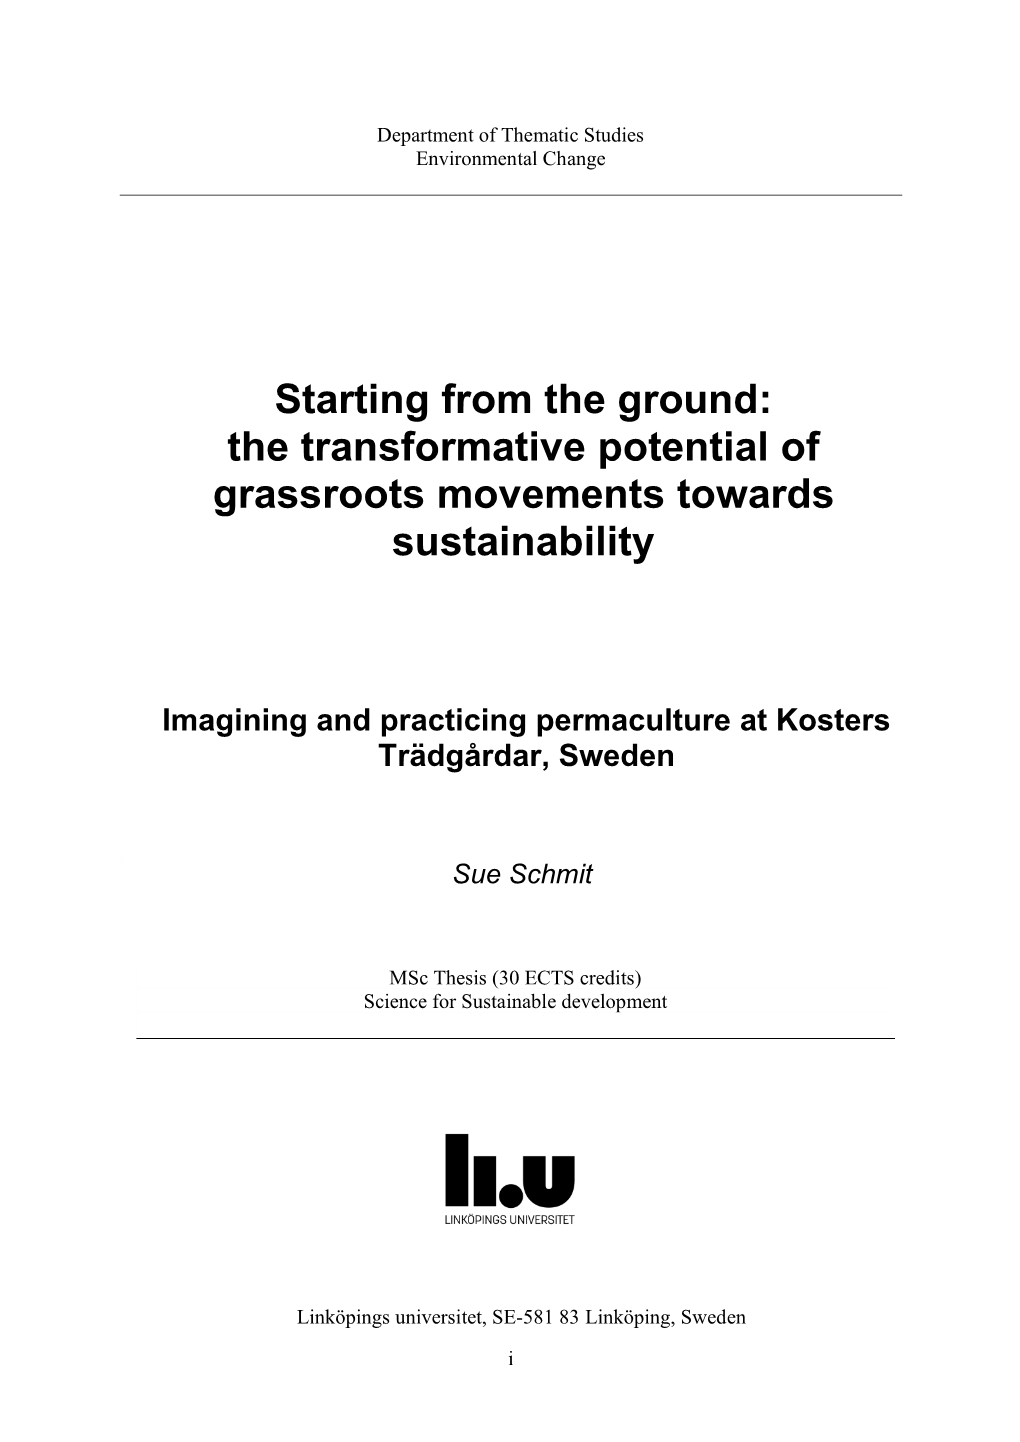 Starting from the Ground: the Transformative Potential of Grassroots Movements Towards Sustainability